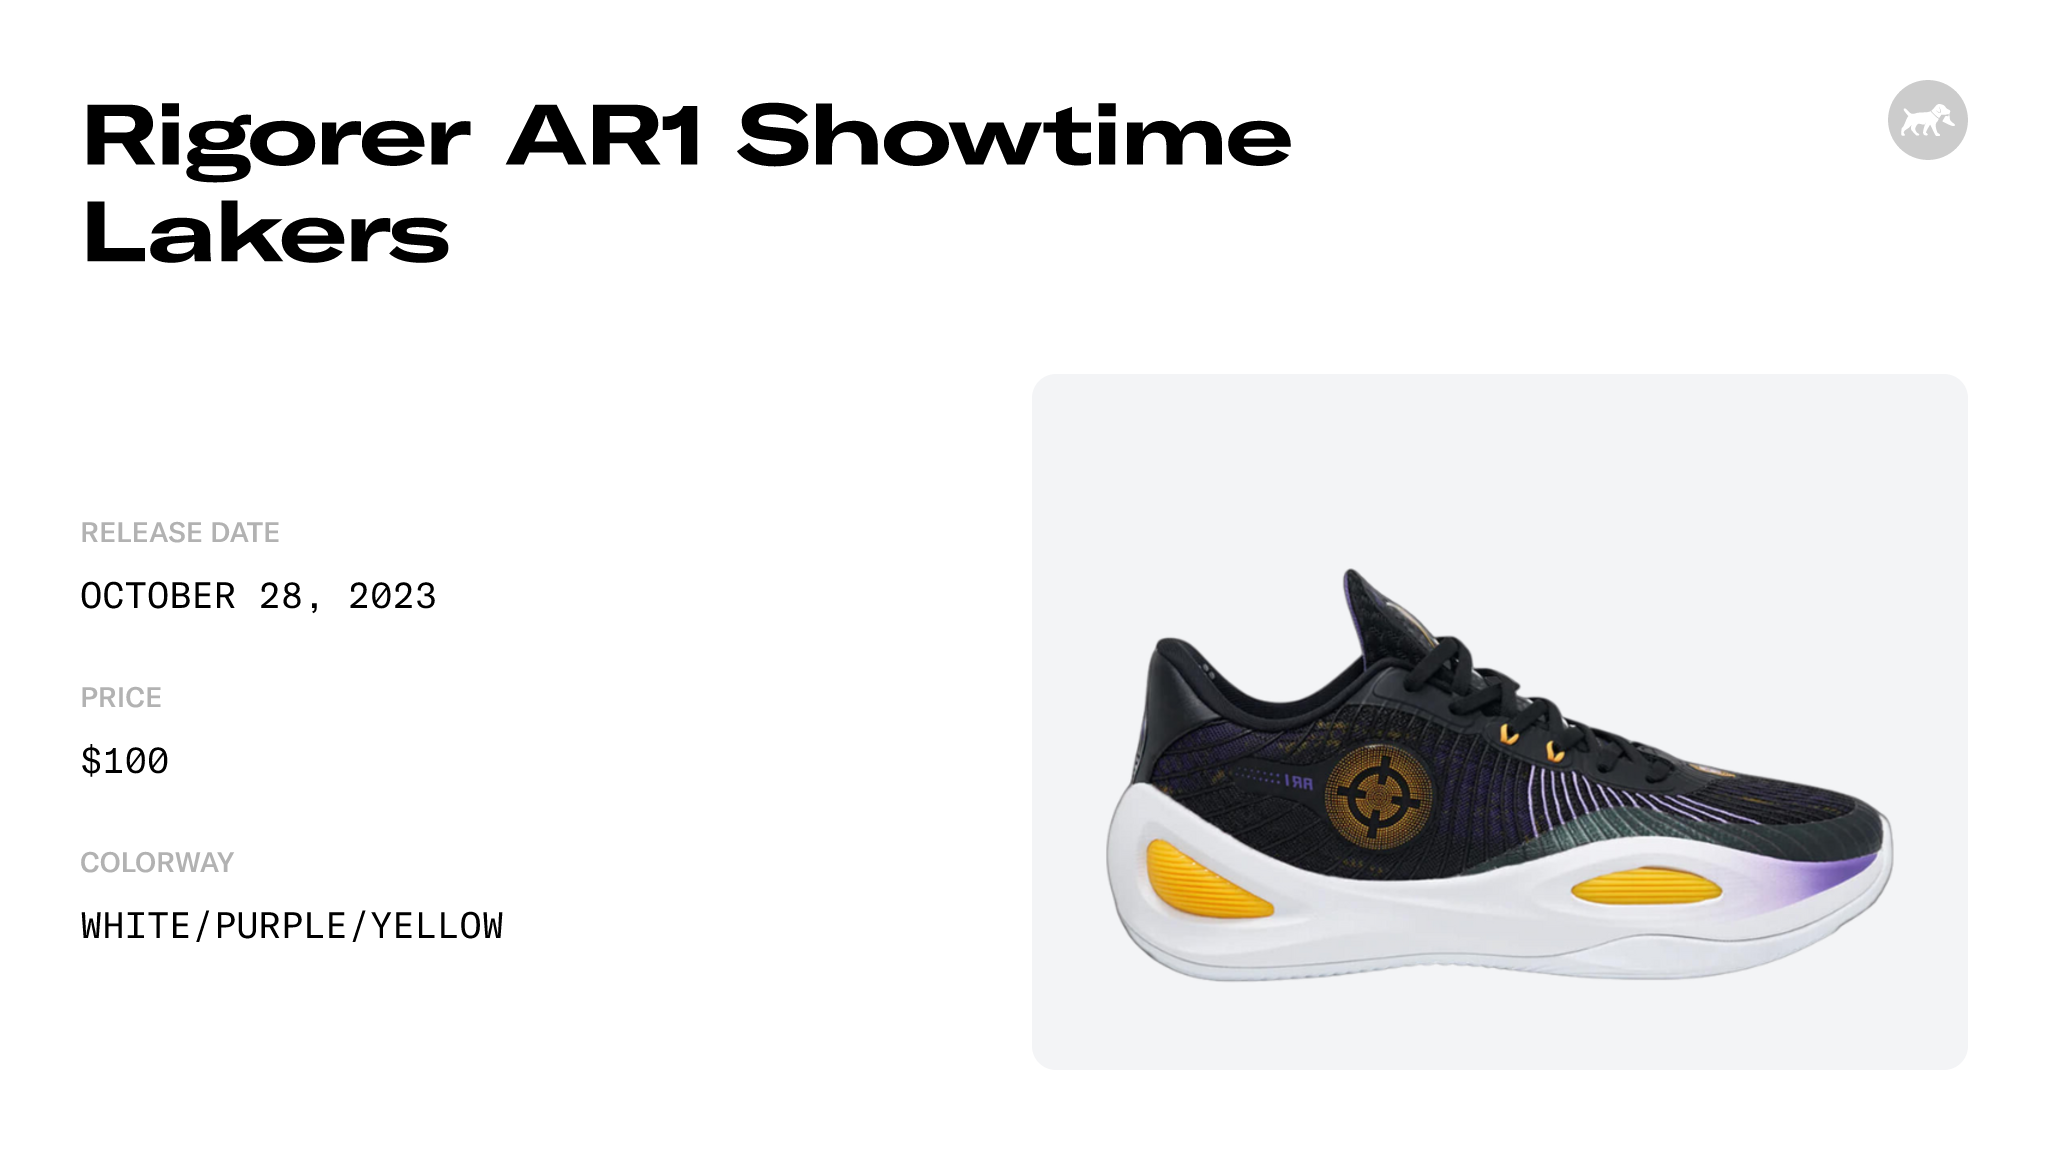 Rigorer AR1 Showtime Lakers - Z323360104-033 Raffles and Release Date